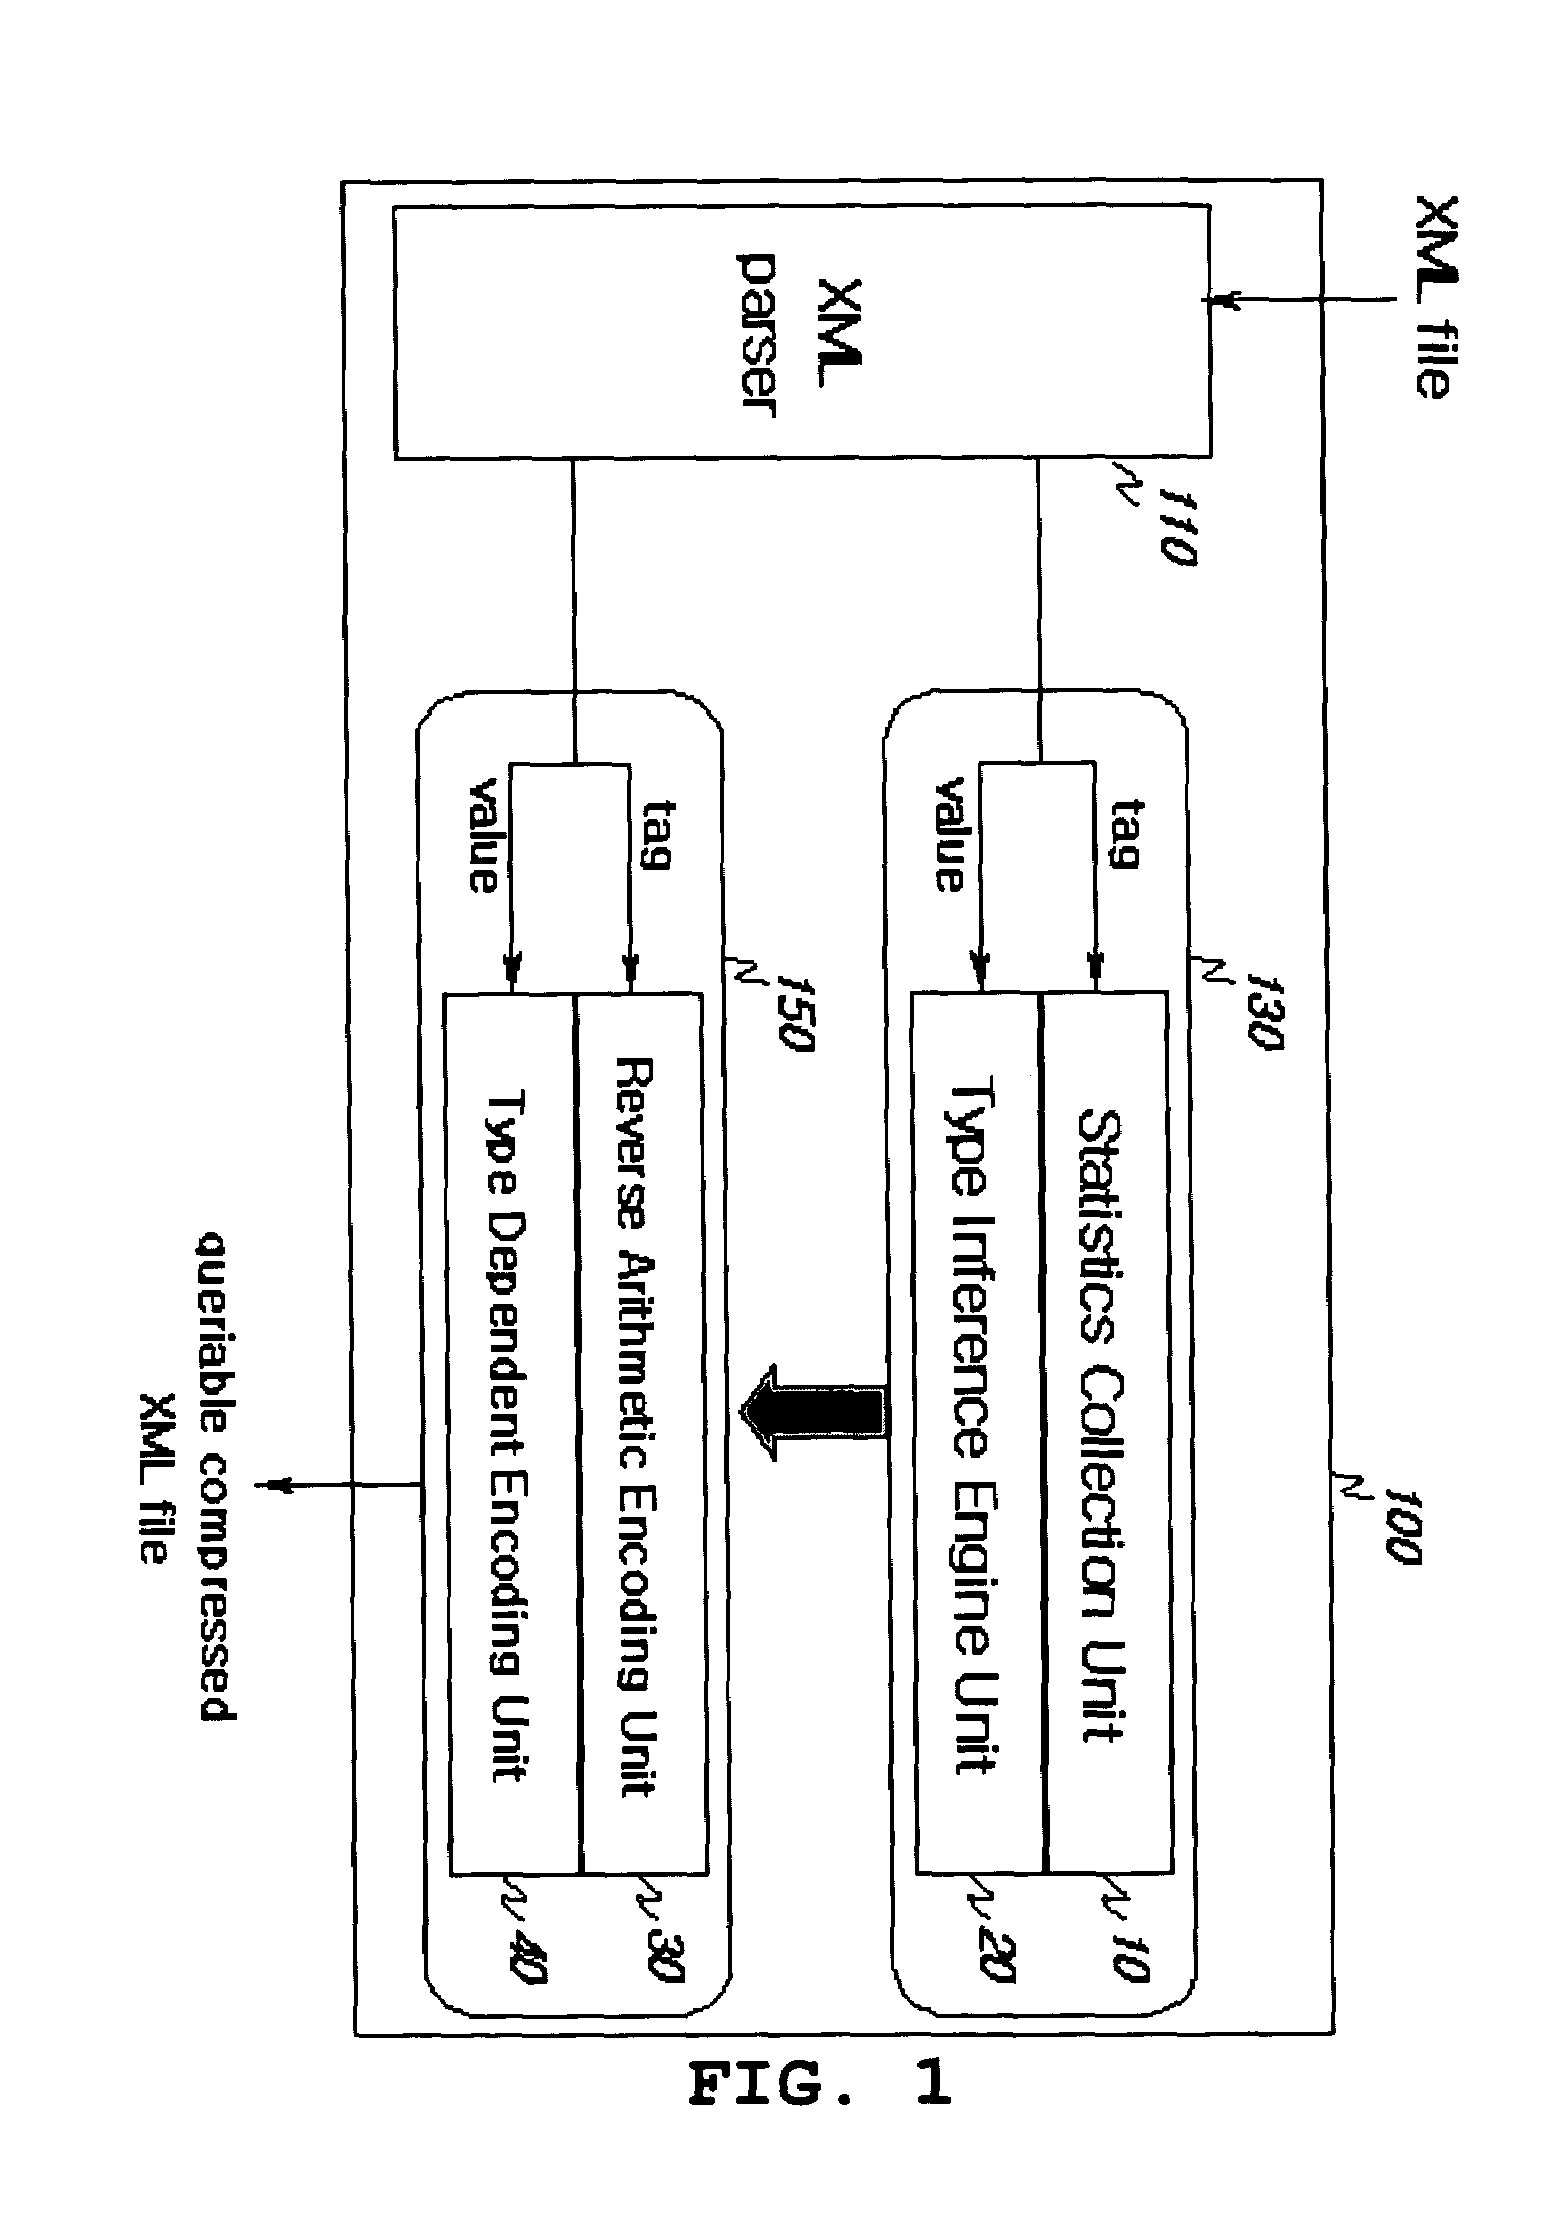 Method of performing queriable XML compression using reverse arithmetic encoding and type inference engine